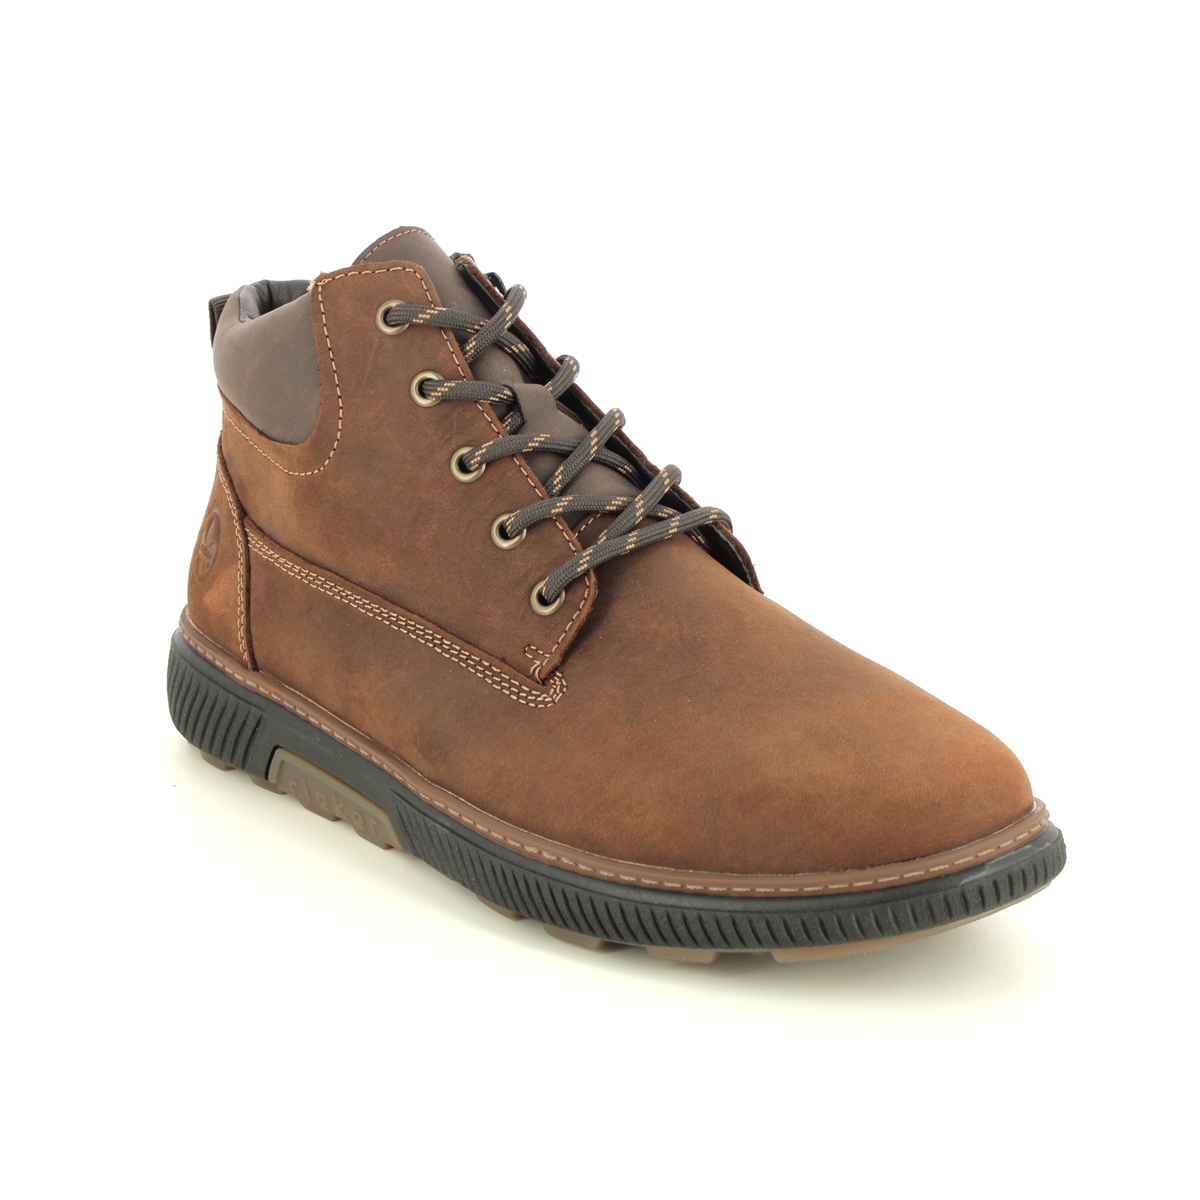 Rieker Prambola Brown Suede Mens Chukka Boots B3312-22 In Size 46 In Plain Brown Suede